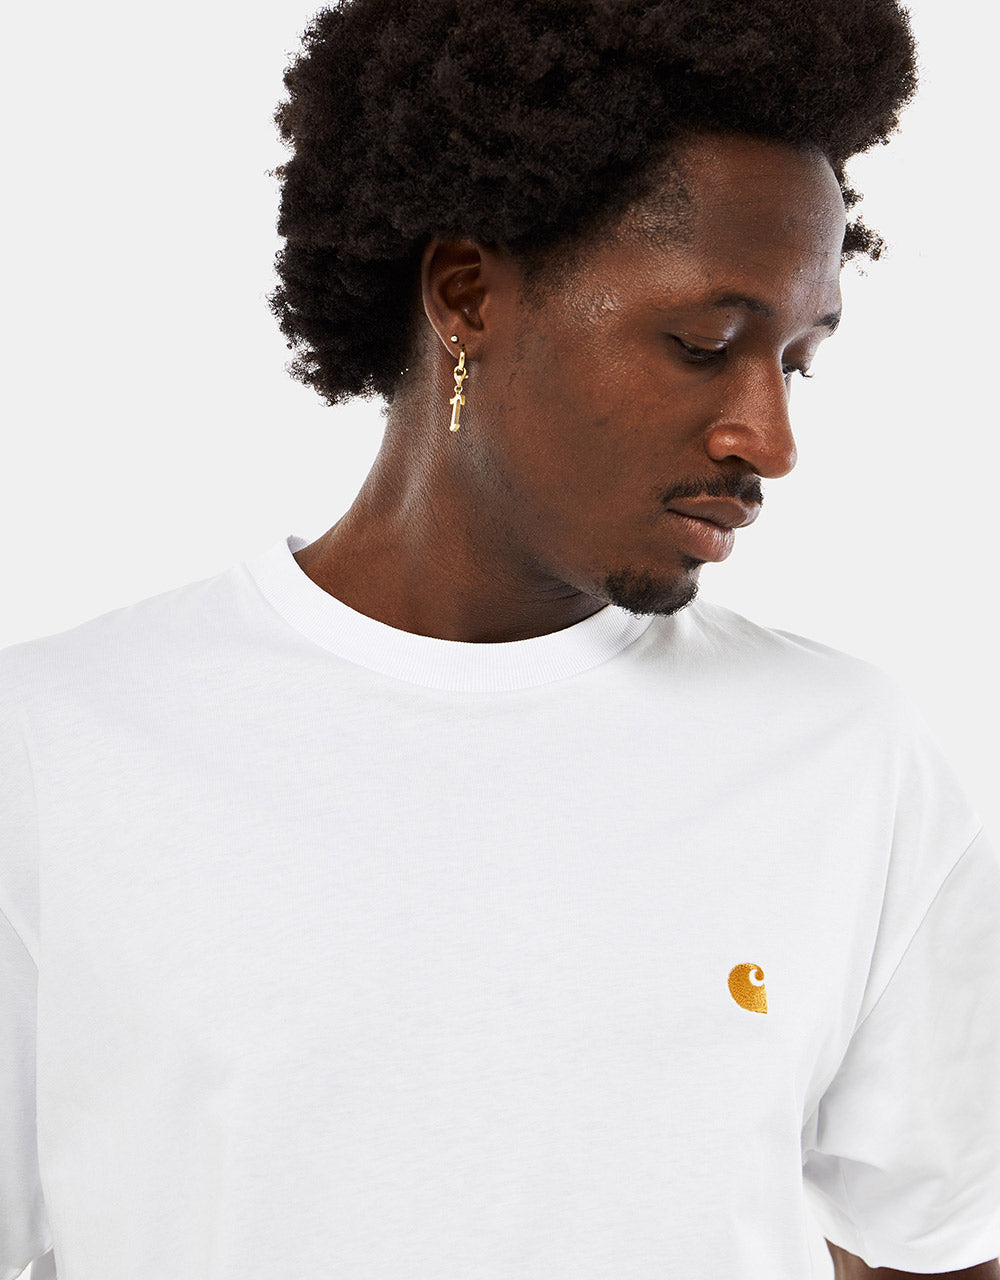 Carhartt WIP Chase T-Shirt - White/Gold